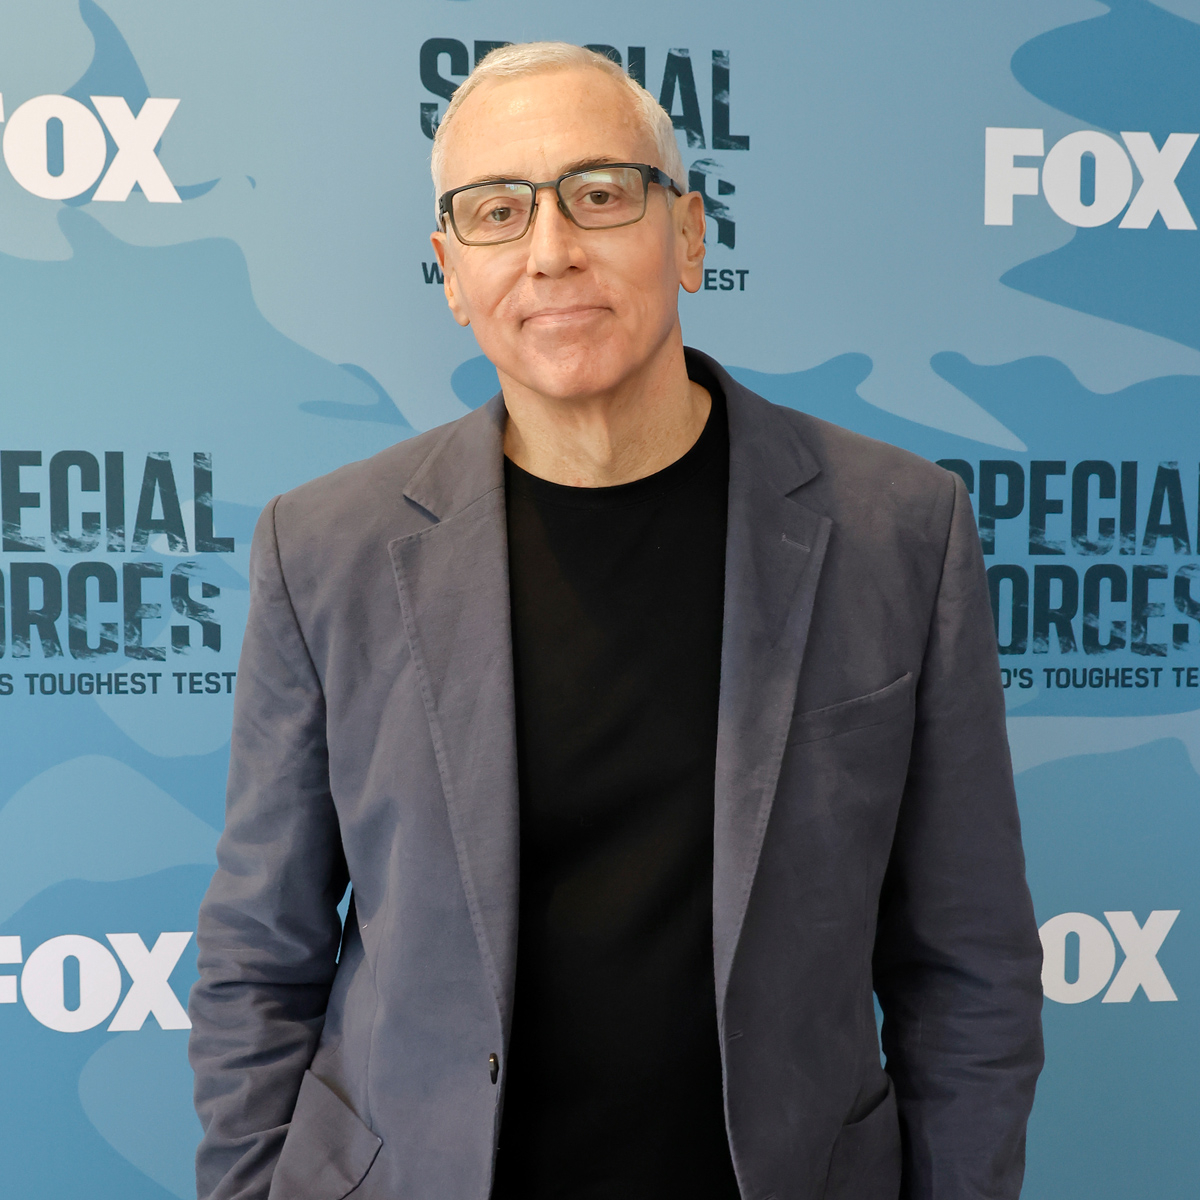 Dr. Drew Details “Concerns” About Ozempic as a Weight Loss Drug